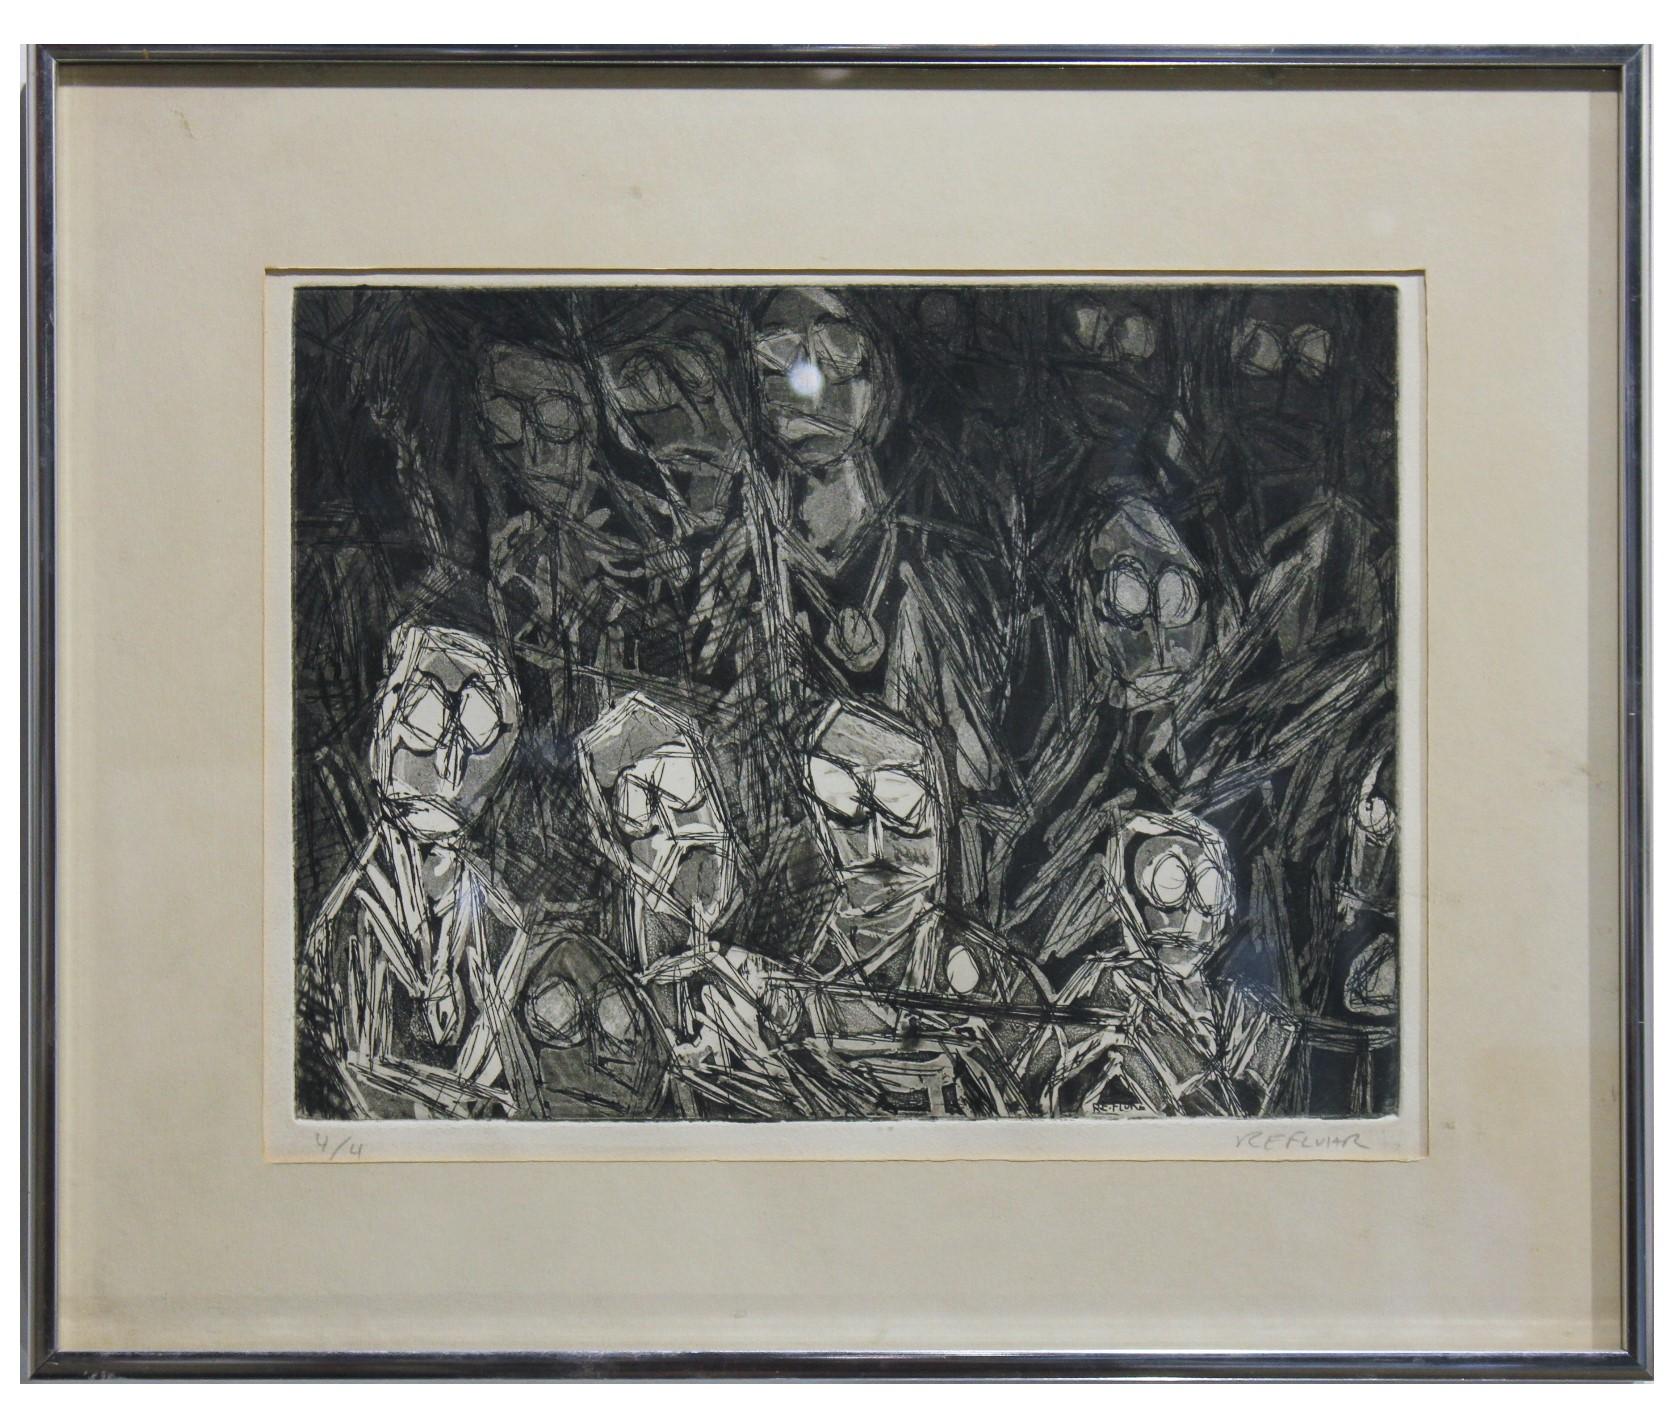 Richard E. Fluhr Figurative Print - Surrealist Crowed of Figures in Black and White Edition 4 of 4